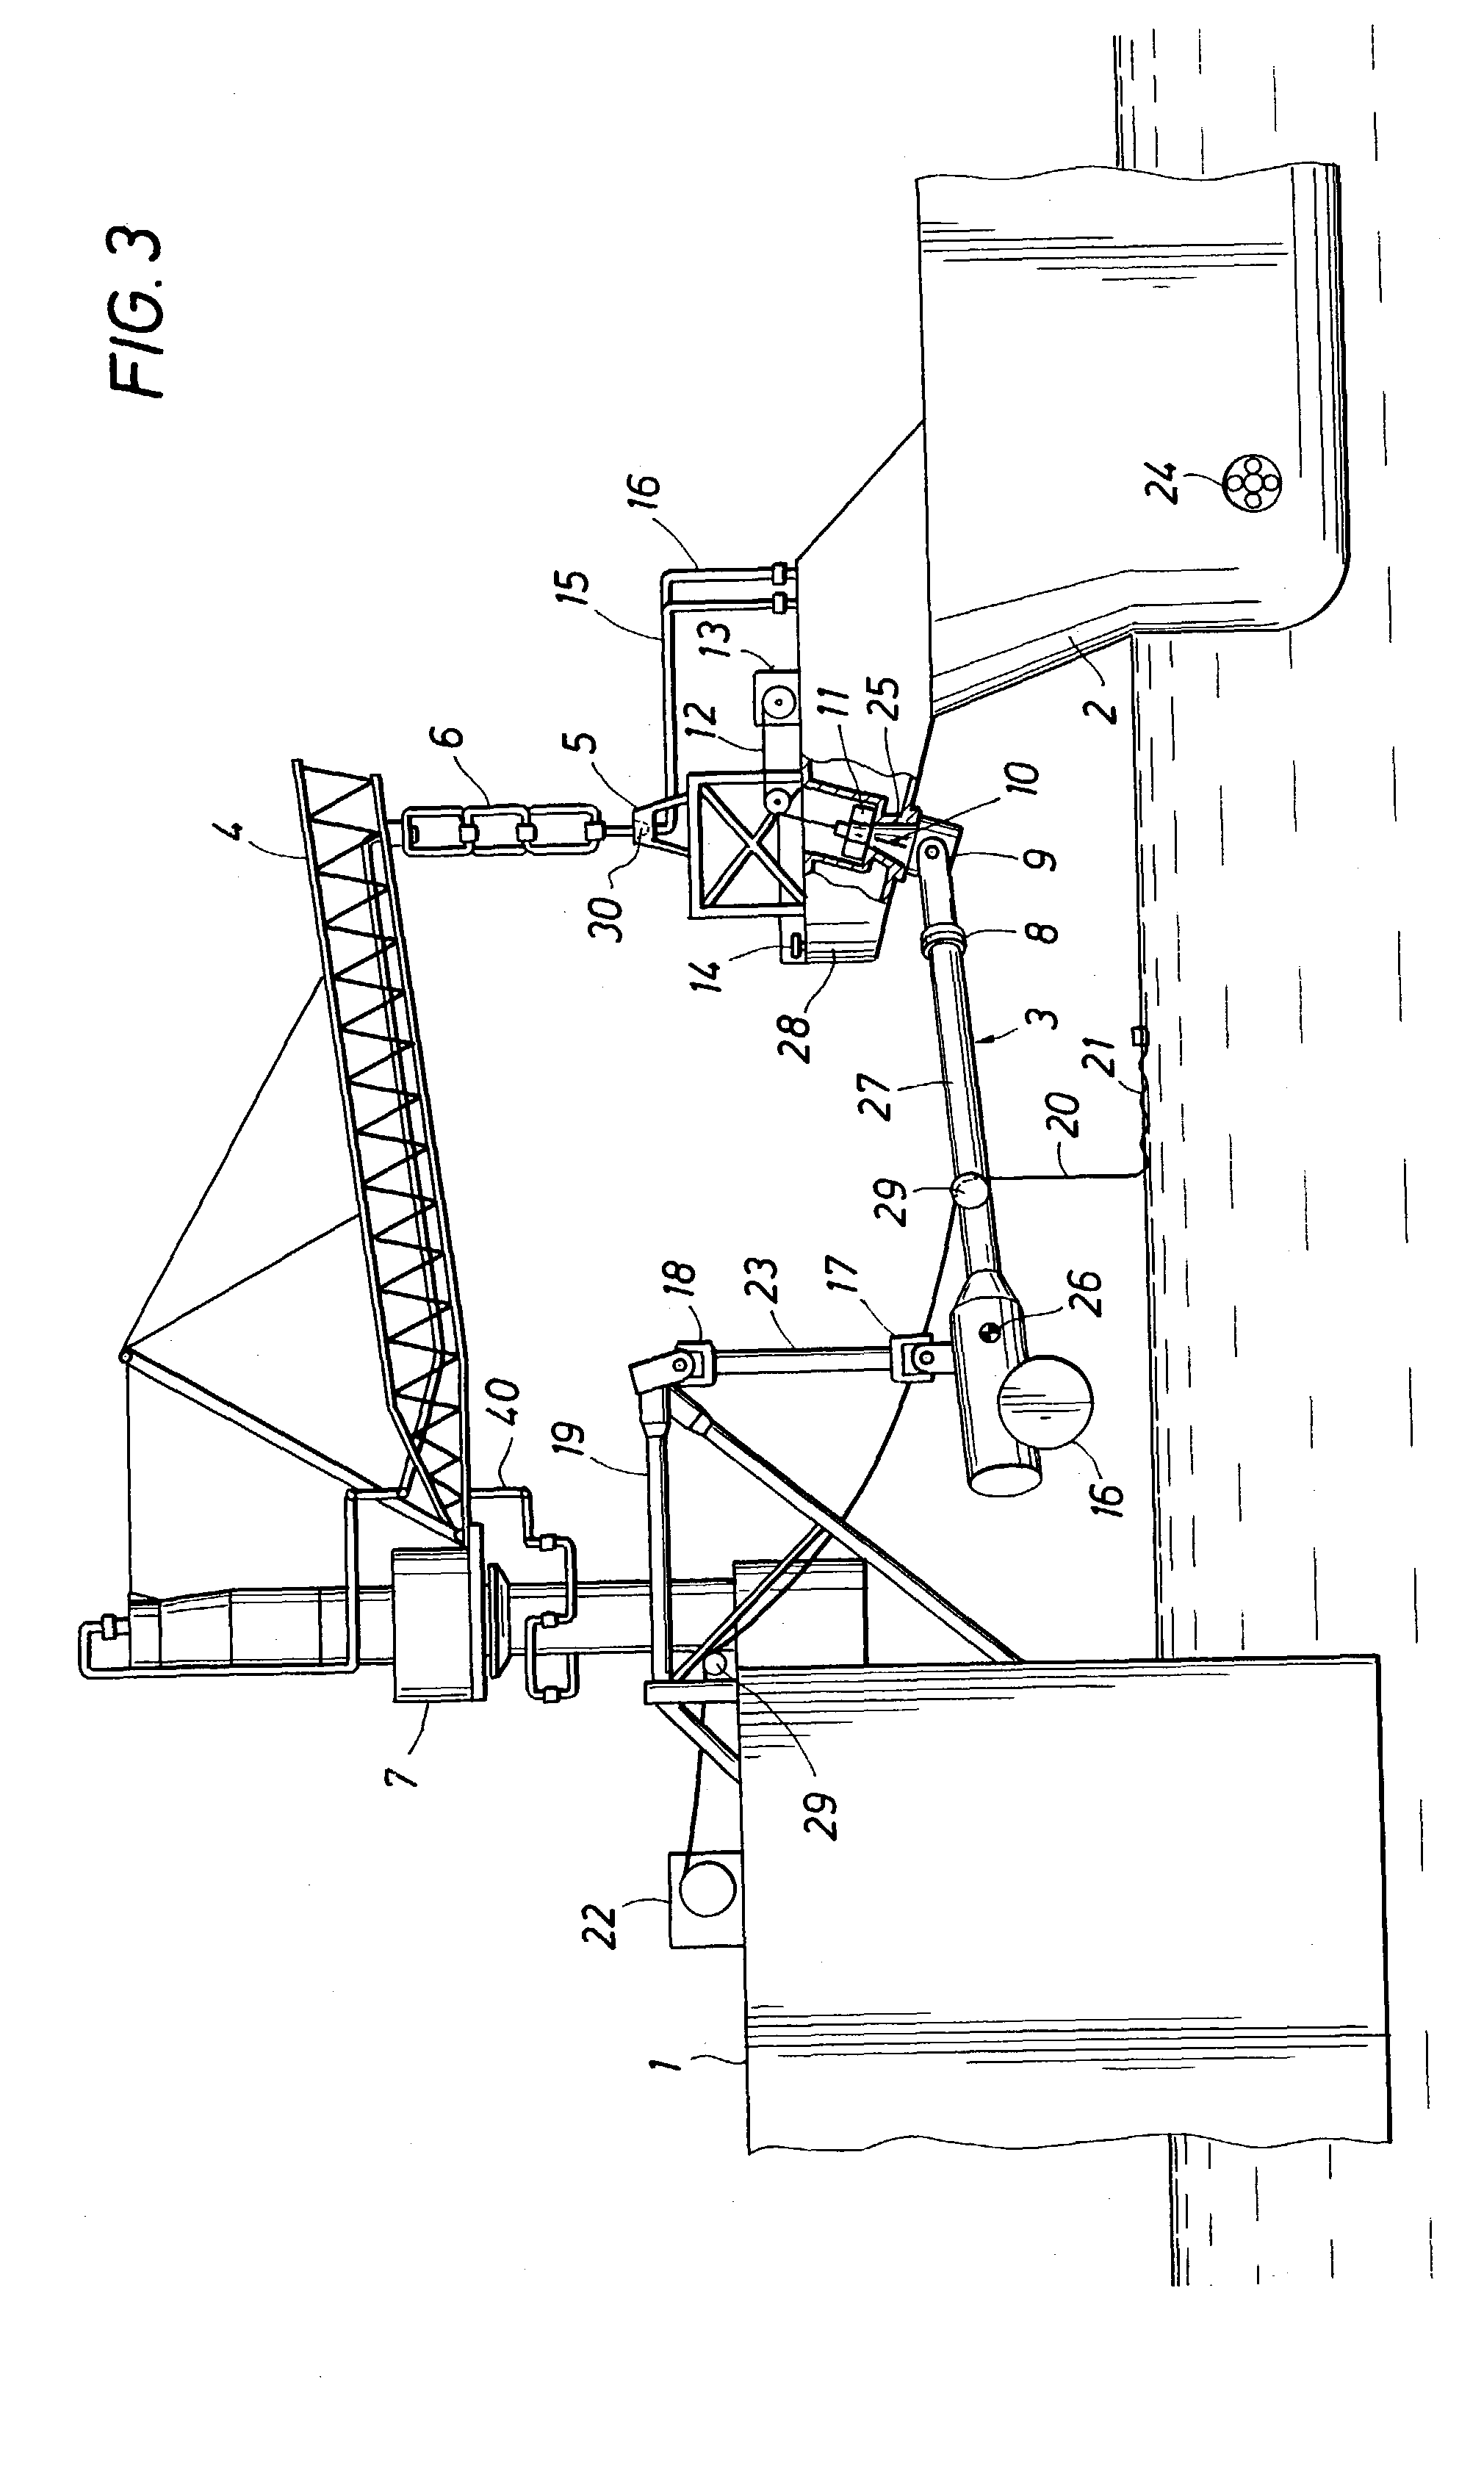 Disconnectable mooring system and LNG transfer system and method